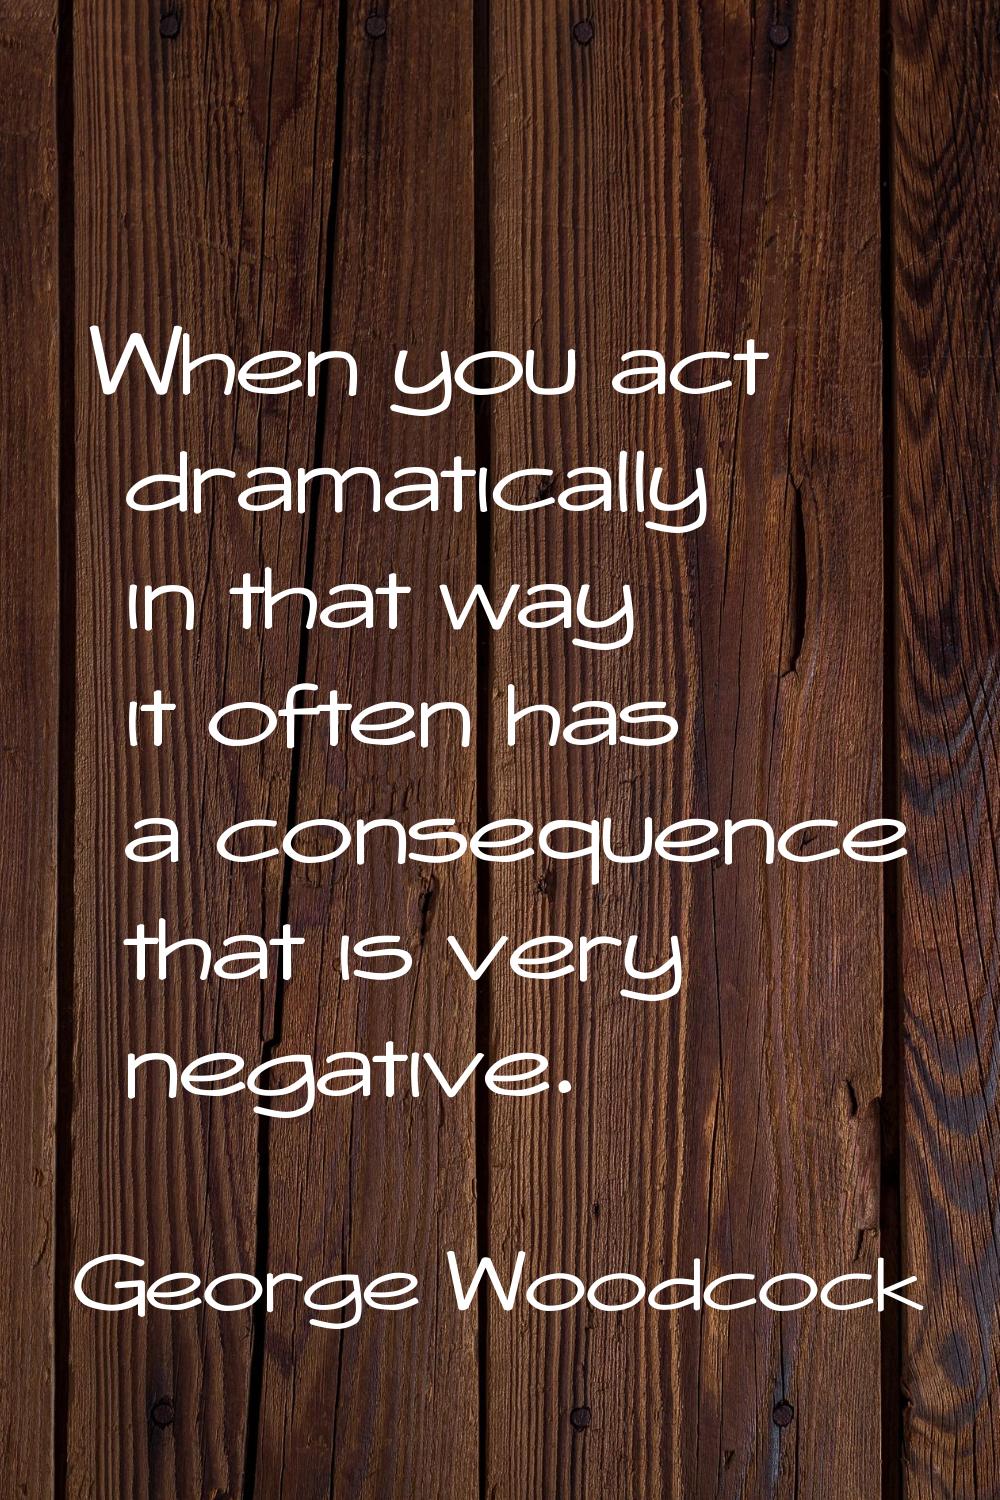 When you act dramatically in that way it often has a consequence that is very negative.